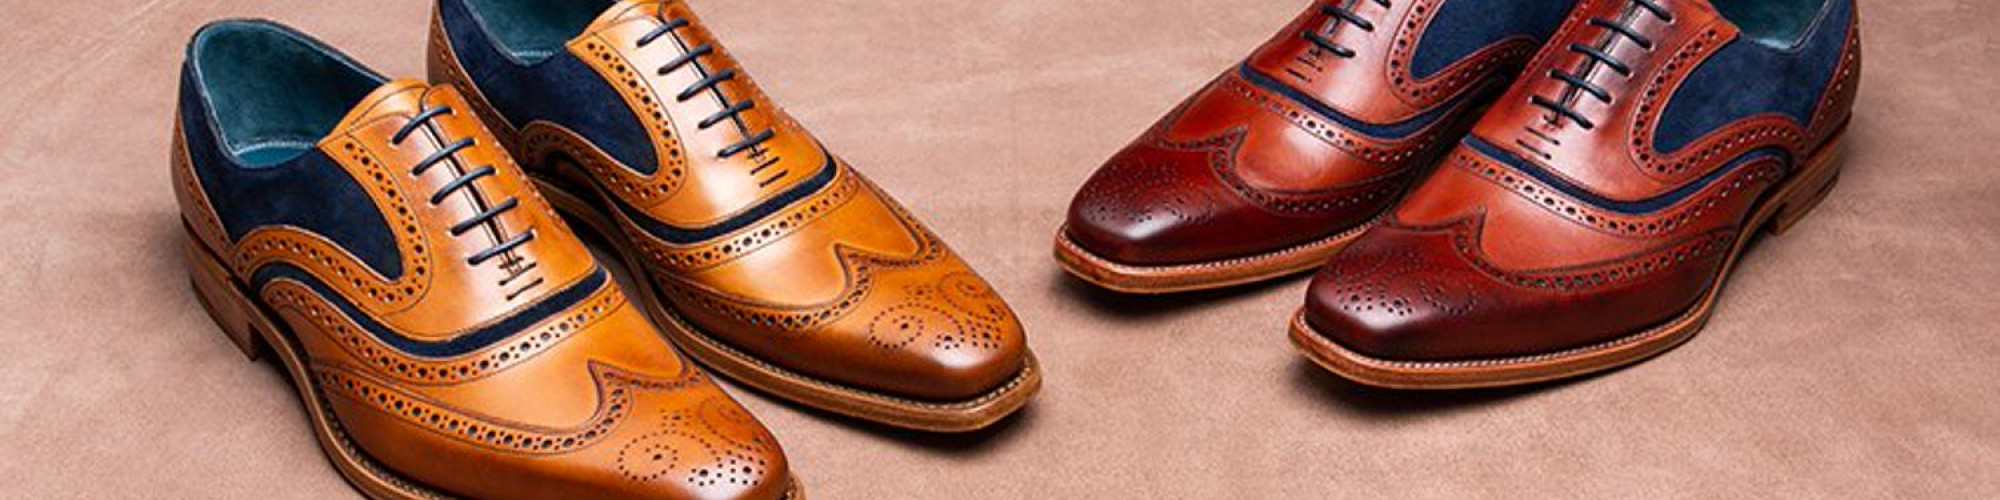 Barker Shoes | Drapers Jobs